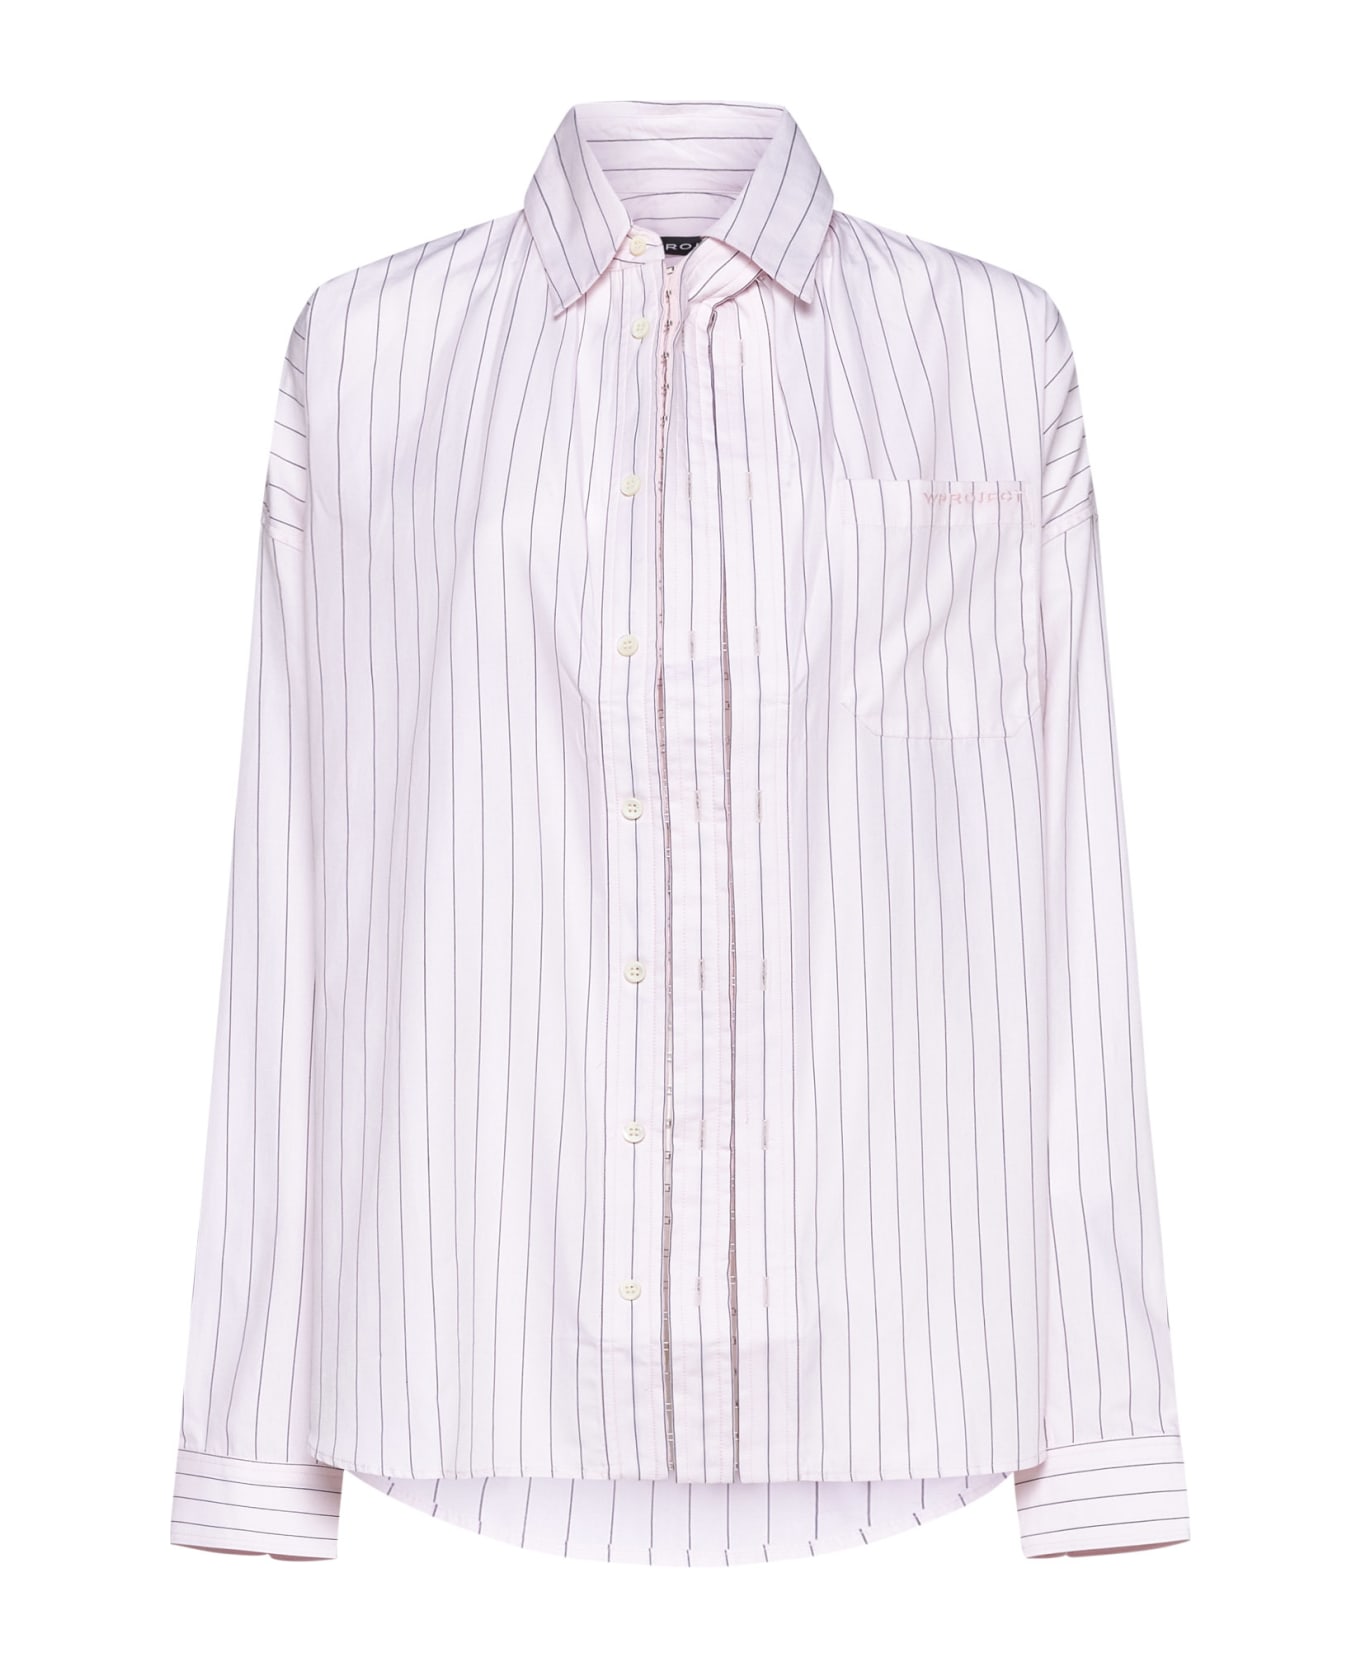 Y/Project Shirt - Pink stripe シャツ